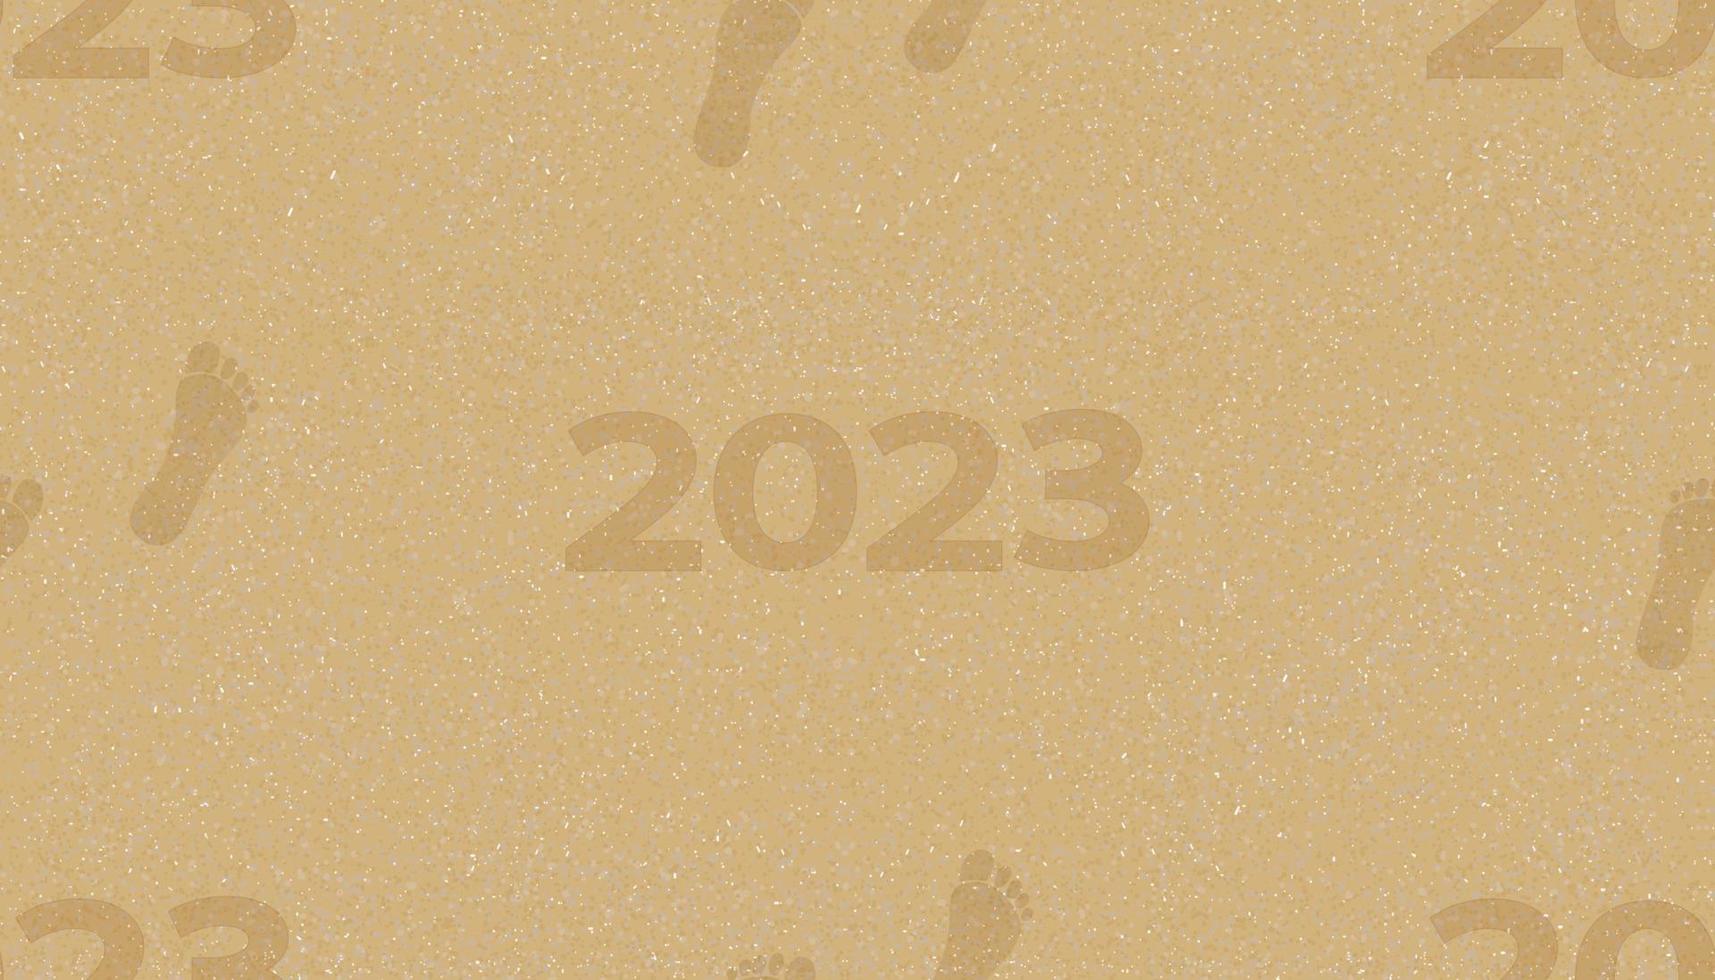 Seamless pattern 2023 Footprints on brown sand beach background. Vector illustration top view pattern foot steps walking forward on sea sand texture.